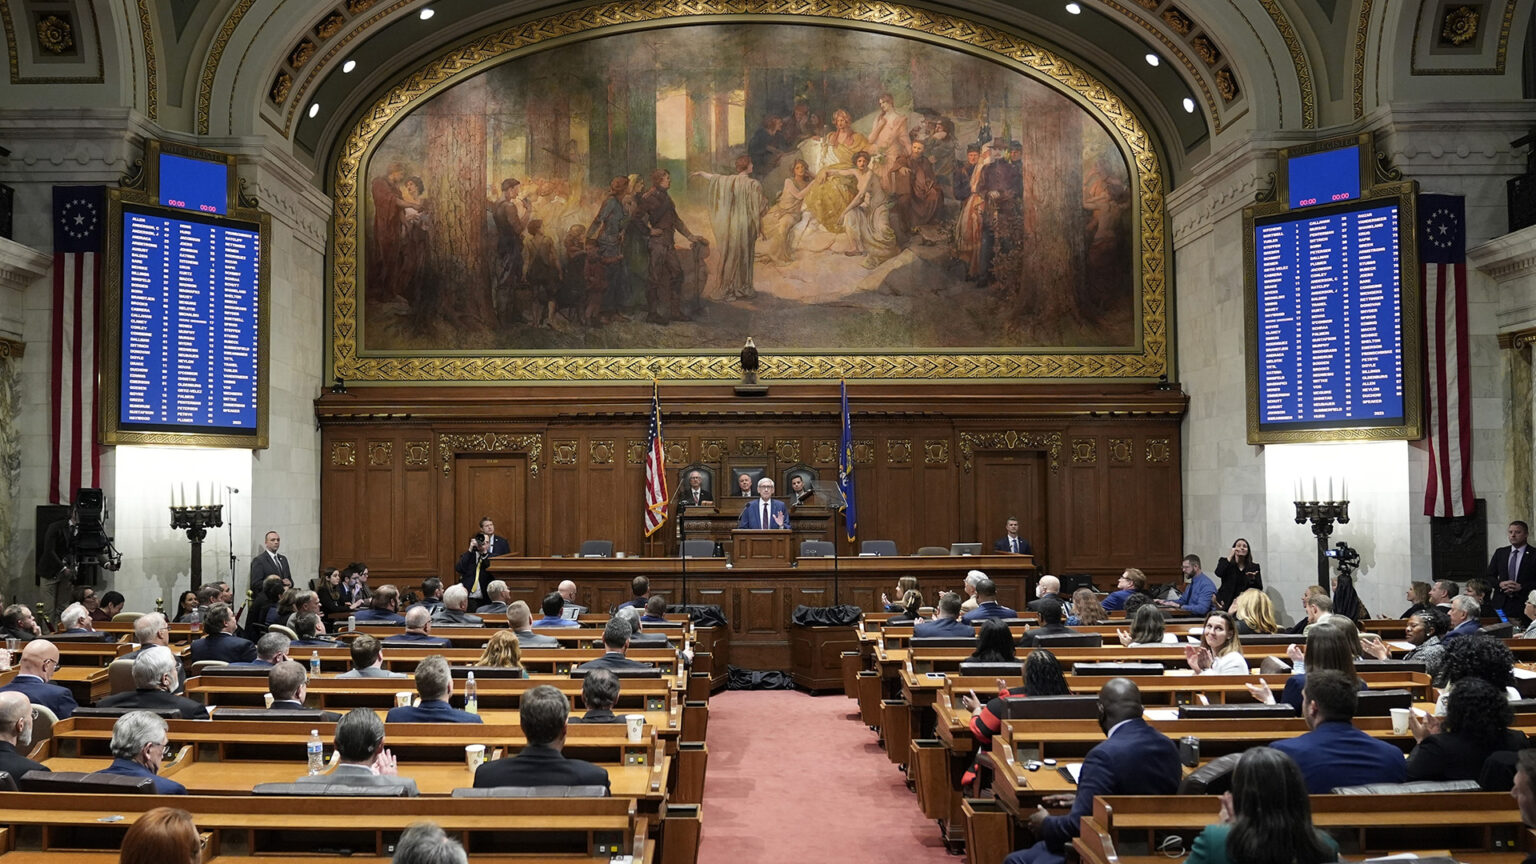 Tony Evers speaks while standing behind a podium on a wood legislative dais, with three people seated behind him on the next level and dozens of people facing him while seated in rows of wood desks, in a high-ceilinged marble masonry room with a taxidermy bald eagle, the U.S. and Wisconsin flags and a large painting with an arched top behind the dais, digital vote registers on either side and U.S. flag bunting beneath two arches on the side wall.